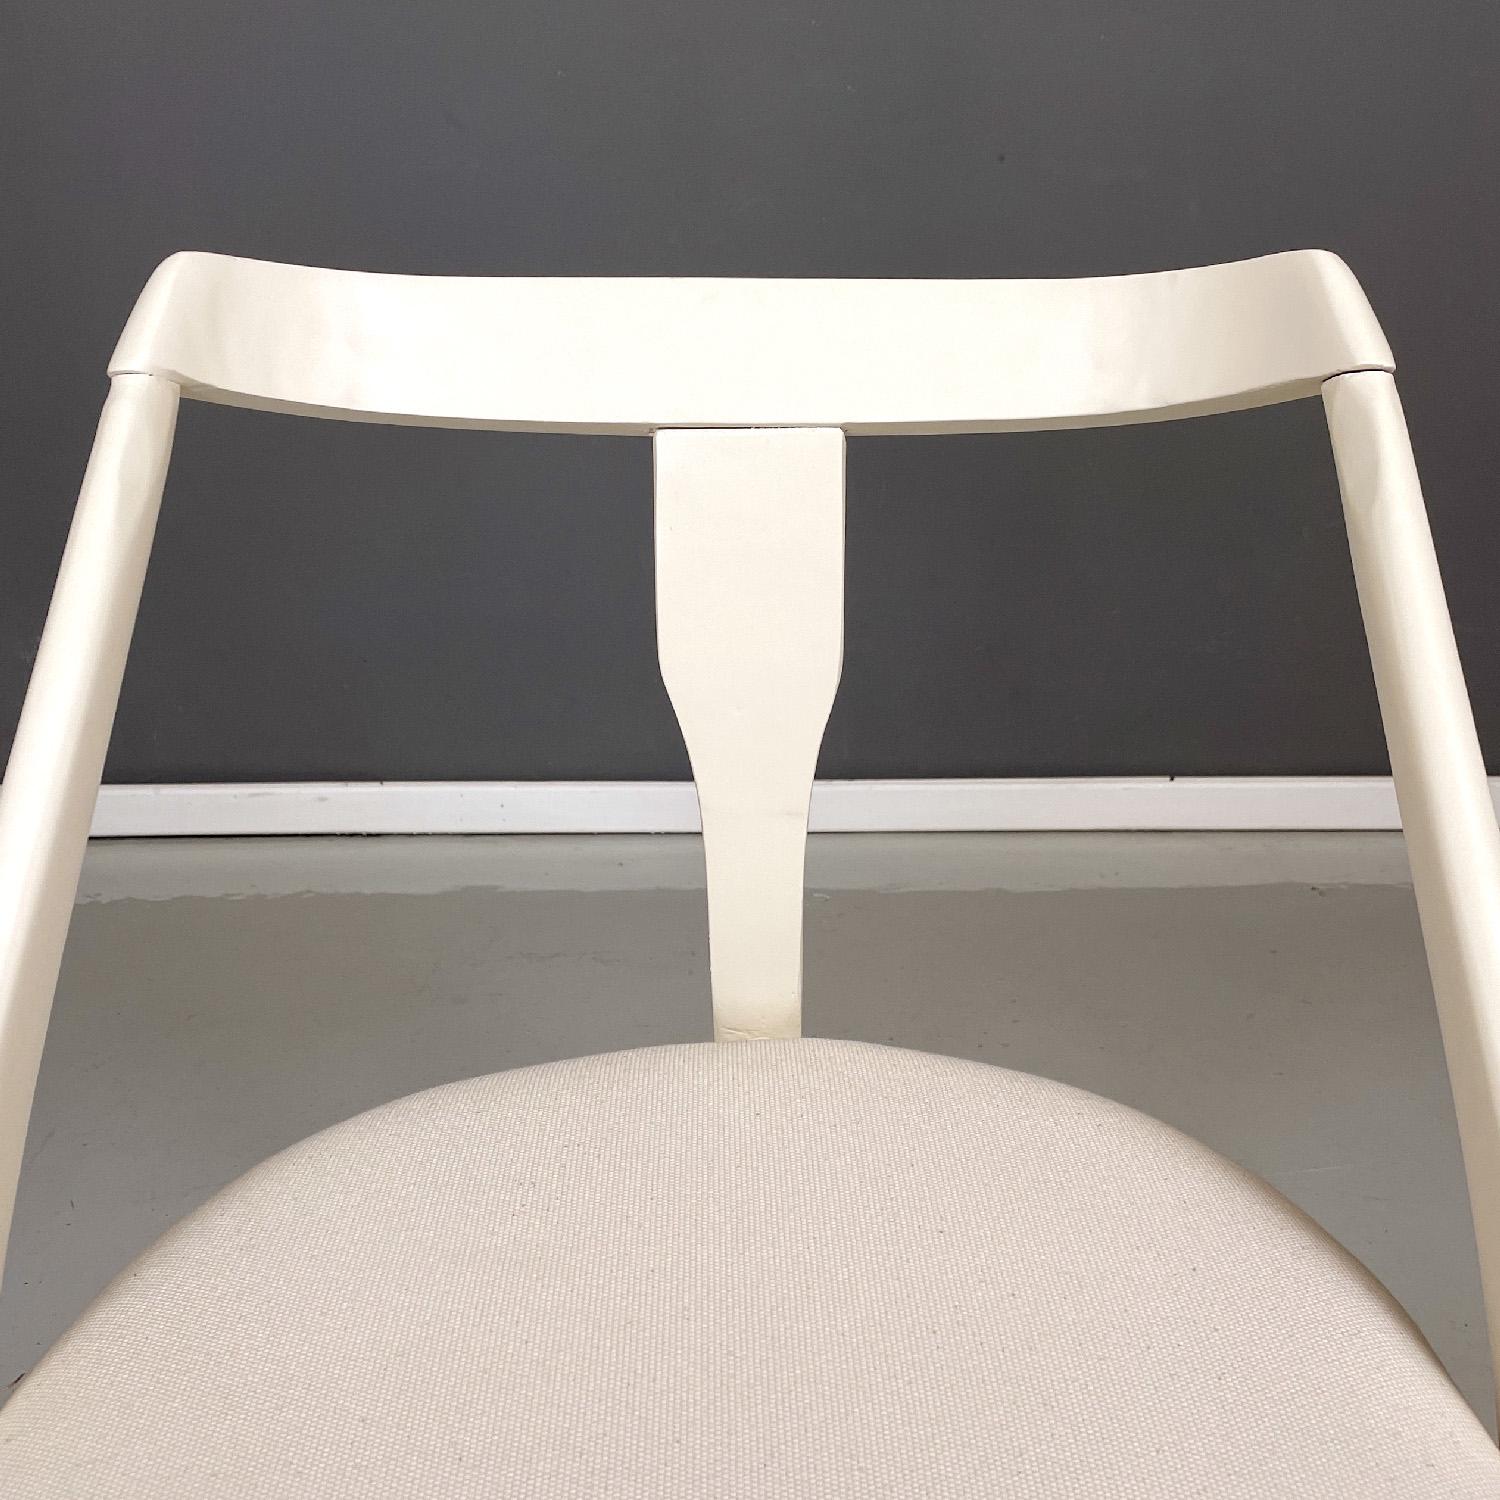 Italian mid-century modern white wood and fabric chairs, 1960s For Sale 3